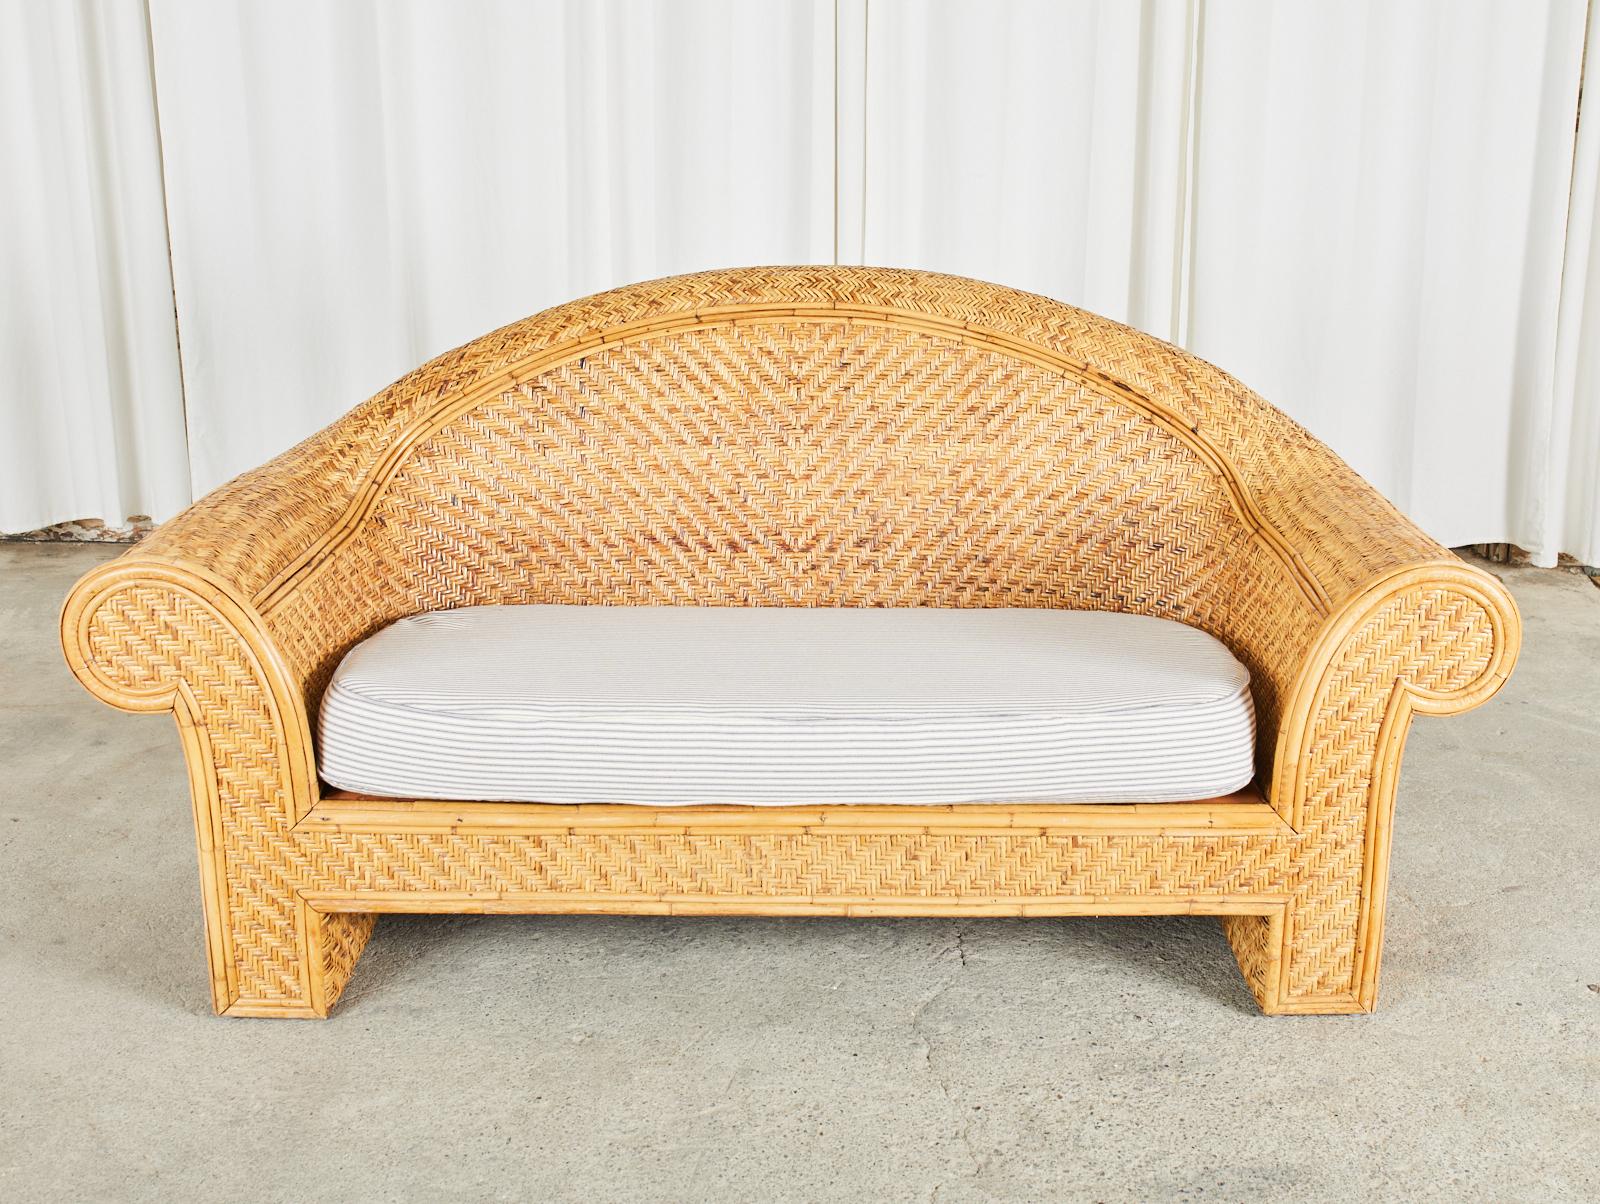 Ralph Lauren Attributed Woven Rattan Bamboo Sofa Settee For Sale 4